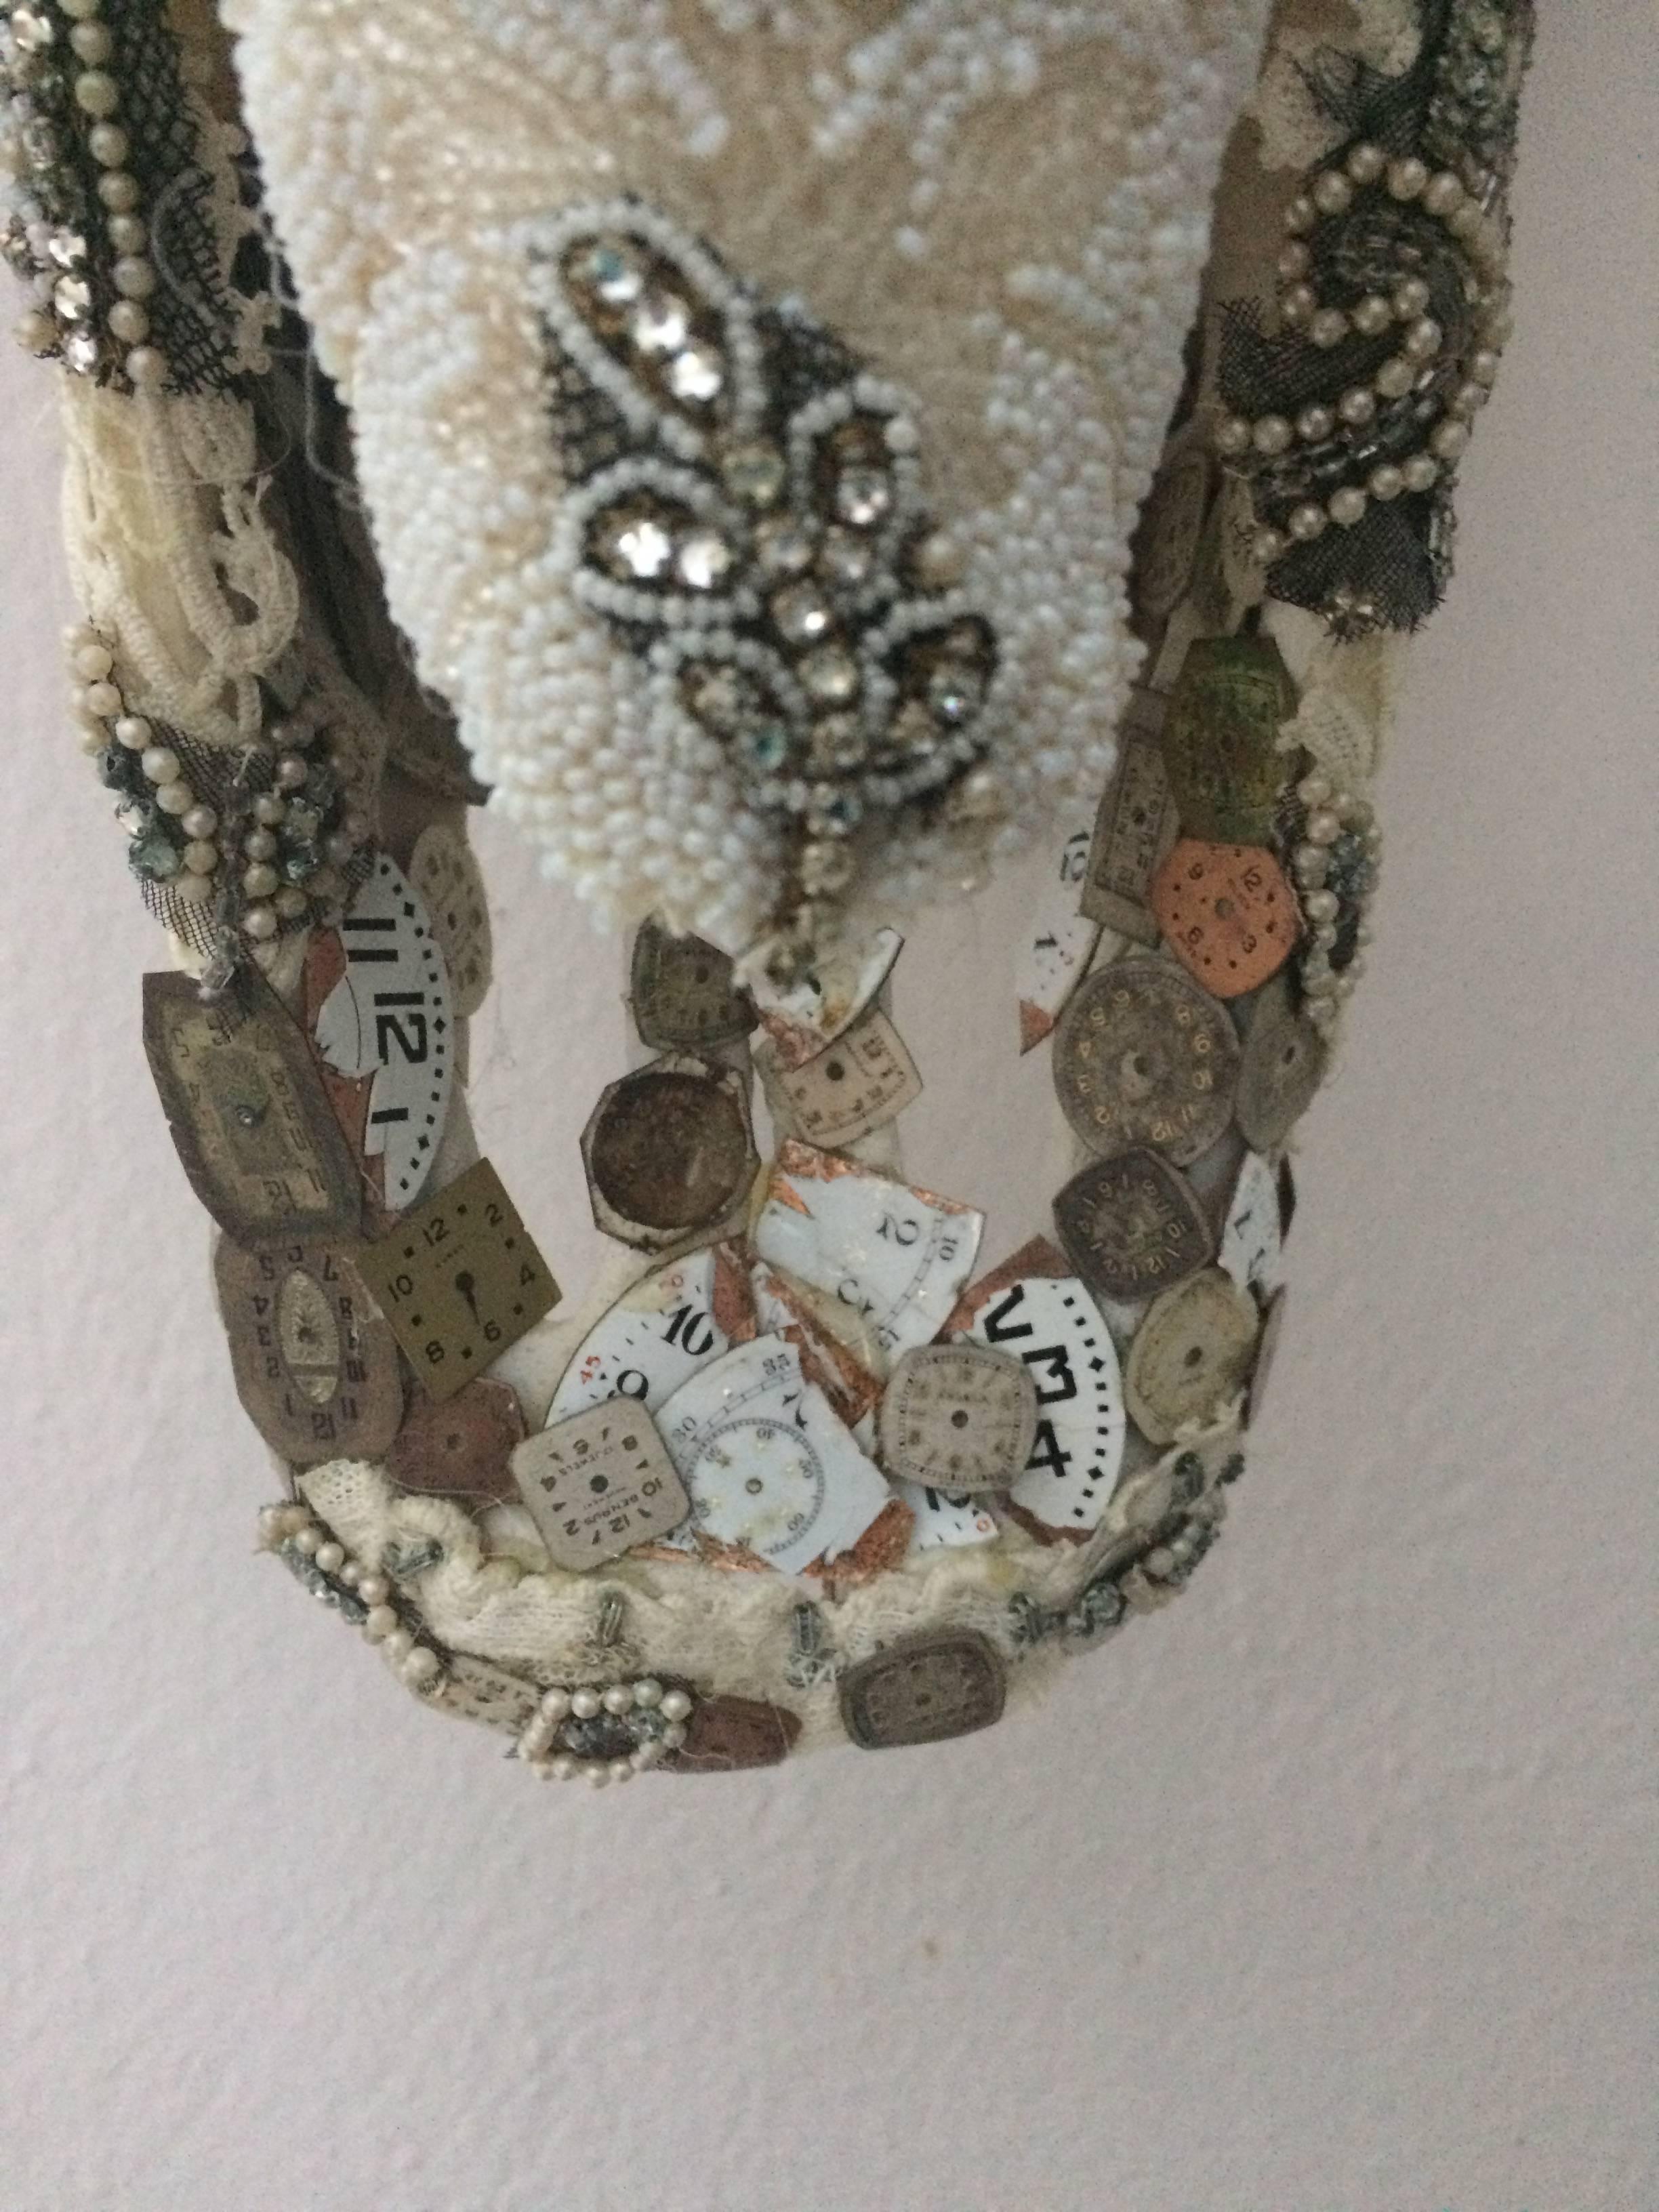 Intricate and Thoughtful Large Mixed Media Skull Sculpture In Excellent Condition For Sale In Hopewell, NJ